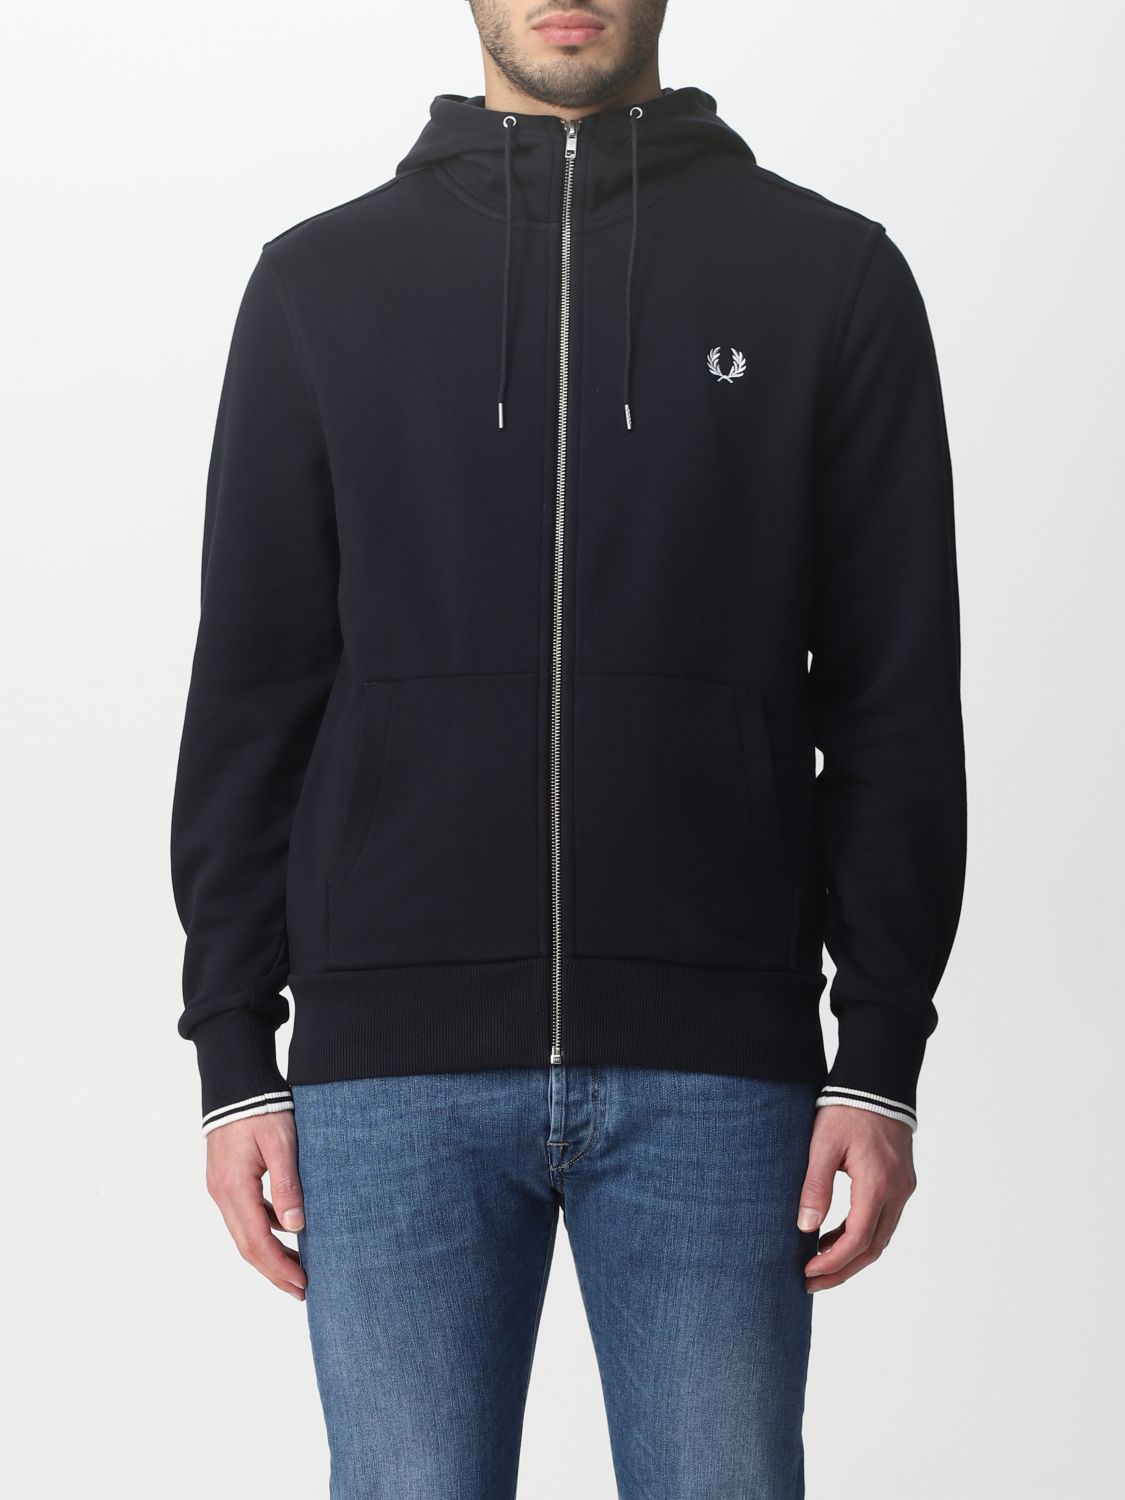 Sweatshirt Fred Perry: Fred Perry cotton Jumper navy 1